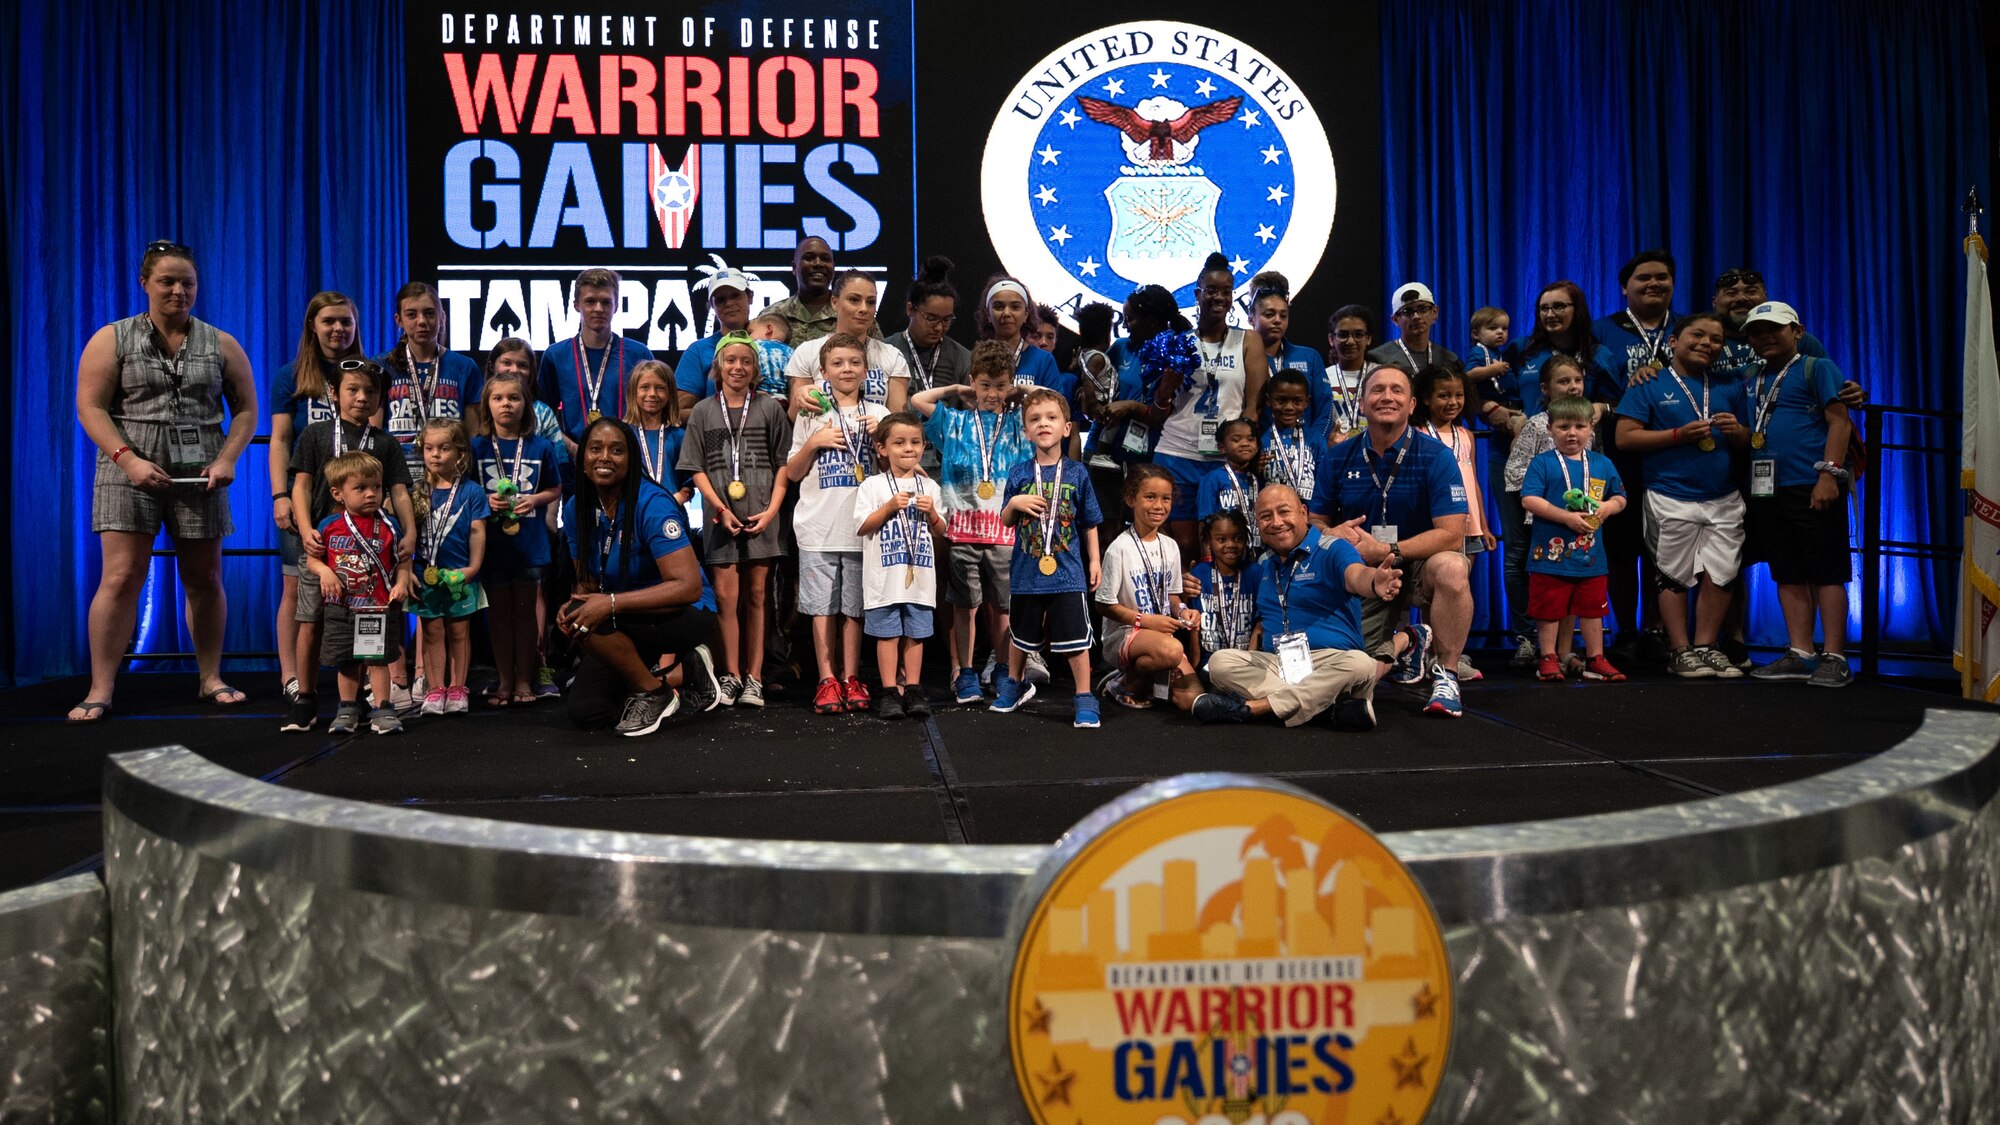 Children of Team Air Force athletes join U.S. Army Brig. Gen. Brian Cashman following a ceremony where the children received medals for their support at the Tampa Convention Center, June 27, 2019. The Warrior Games were established in 2010 as a way to enhance the recovery and rehabilitation of wounded, ill and injured service members and expose them to adaptive sports. Approximately 300 athletes are participating in 13 adaptive sport competitions June 21-30. The athletes represent the United States Army, Marine Corps, Navy, Air Force and Special Operations Command. Athletes from the United Kingdom, Australia, Canada, the Netherlands, and Denmark will also compete. (DoD photo by Staff Sgt. Vito T. Bryant)